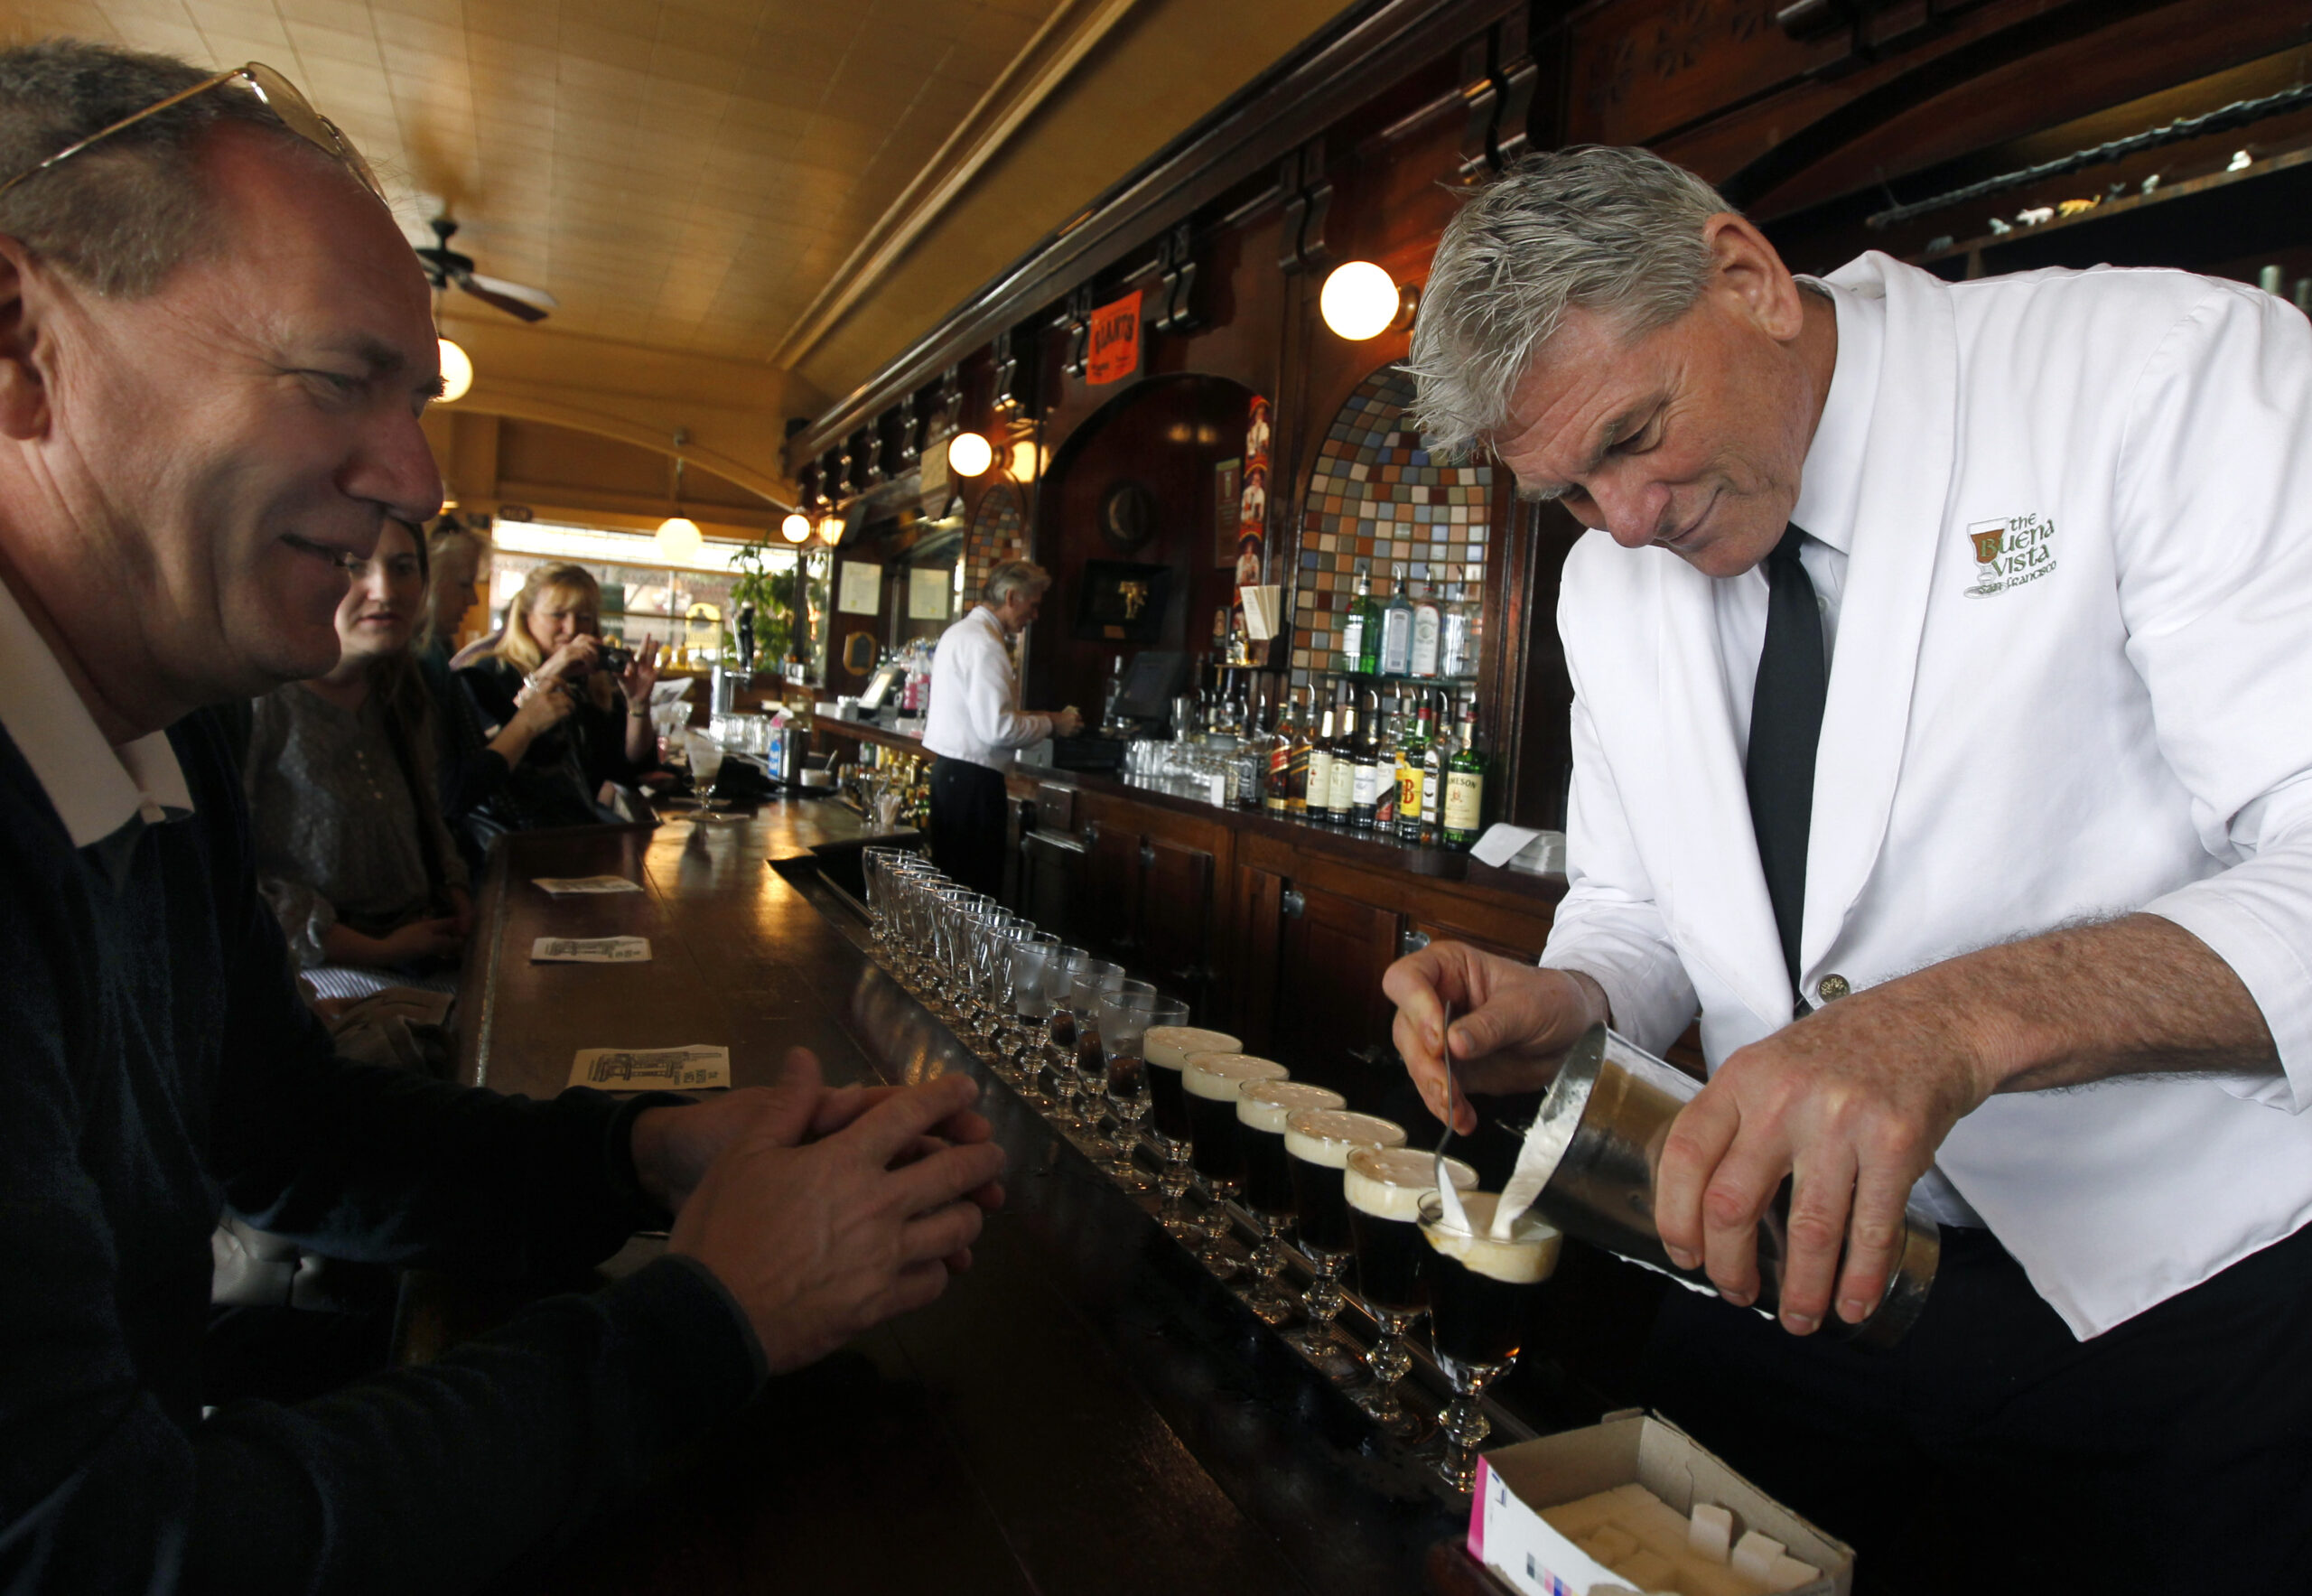 A man pours coffee into a line of clear glasses on a bar.